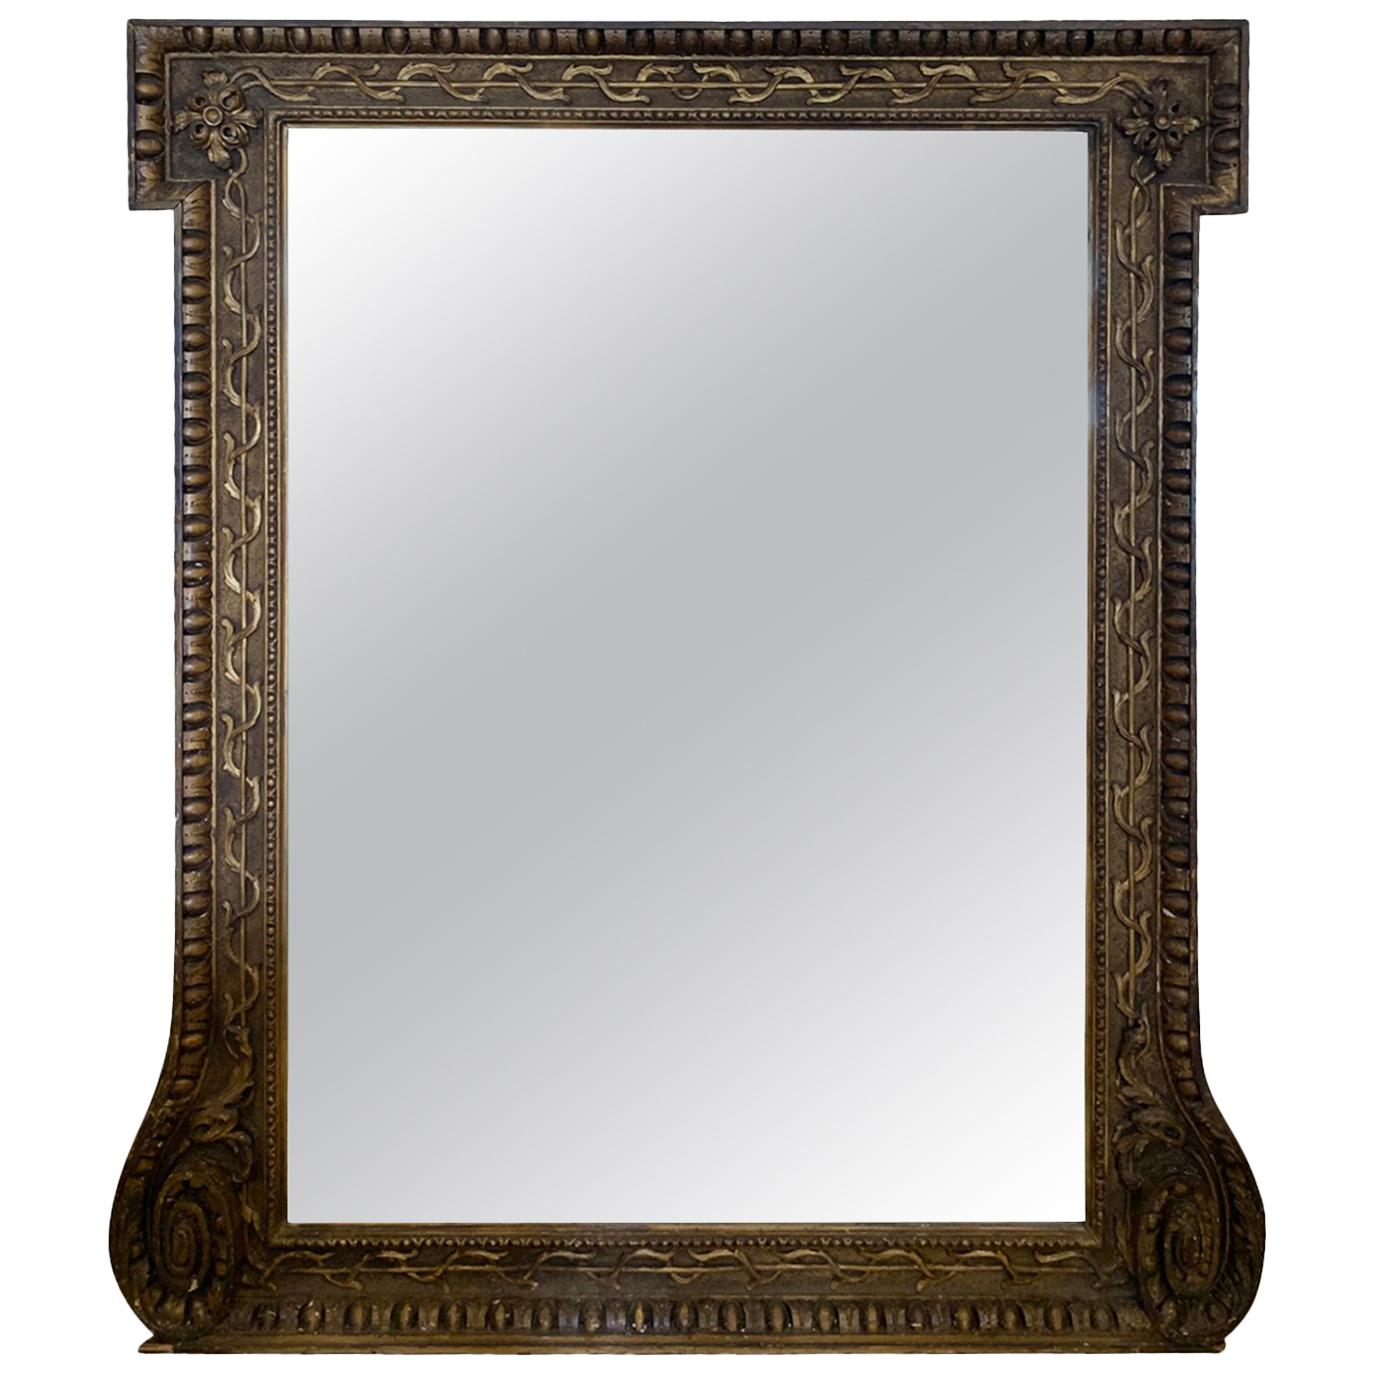 18th-19th Century English Georgian Carved Giltwood Mirror, Style of William Kent